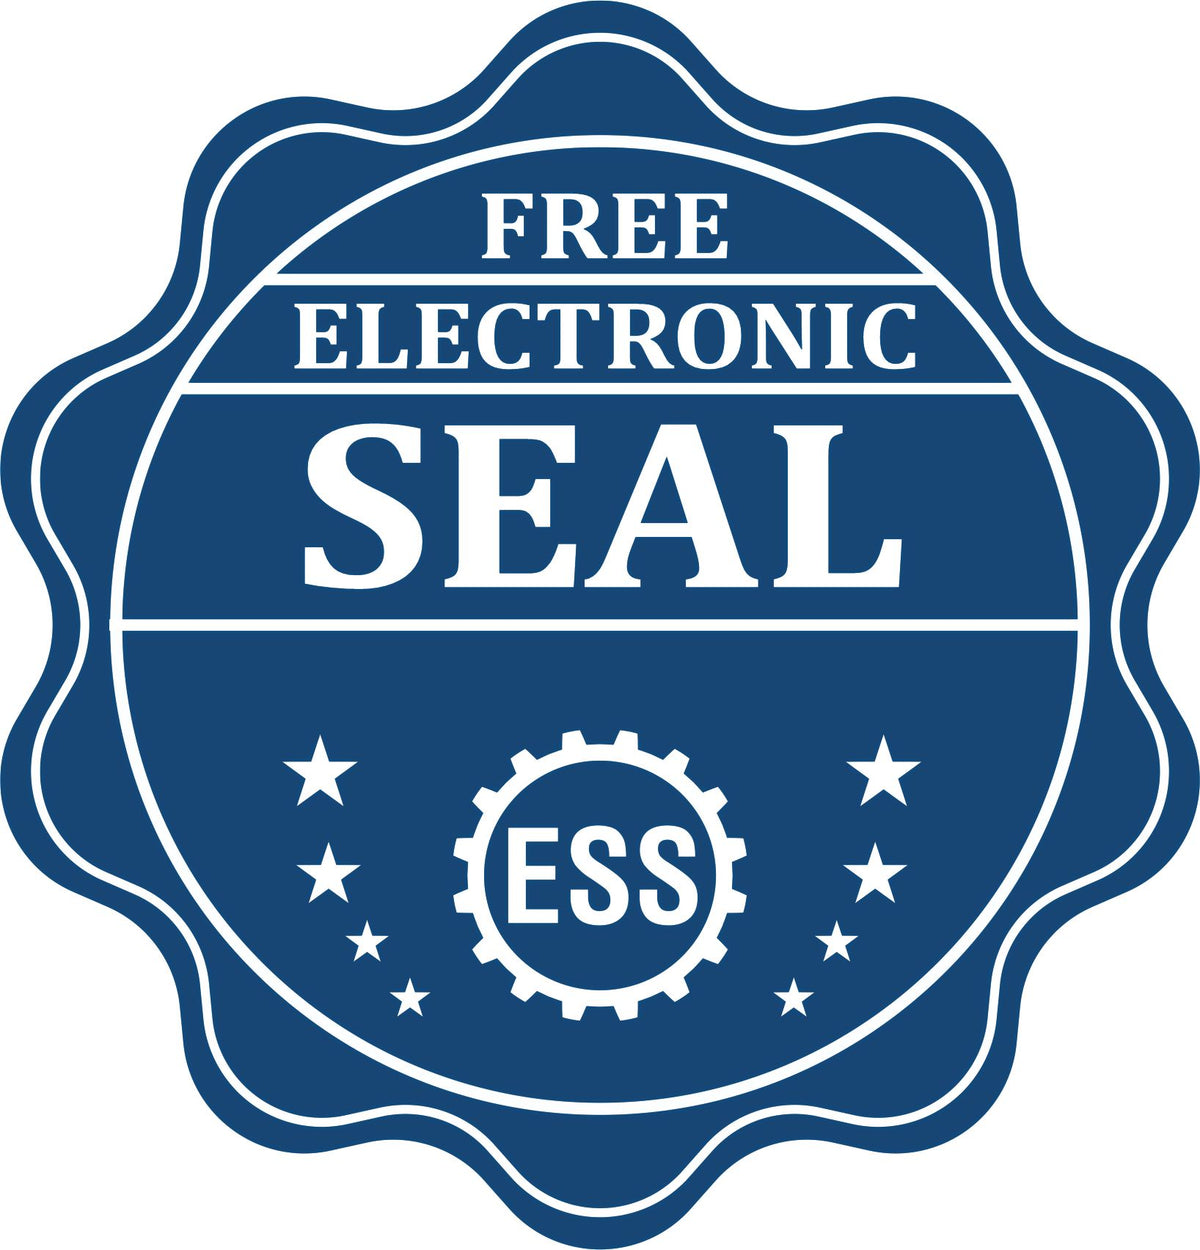 A badge showing a free electronic seal for the Heavy Duty Cast Iron New York Architect Embosser with stars and the ESS gear on the emblem.